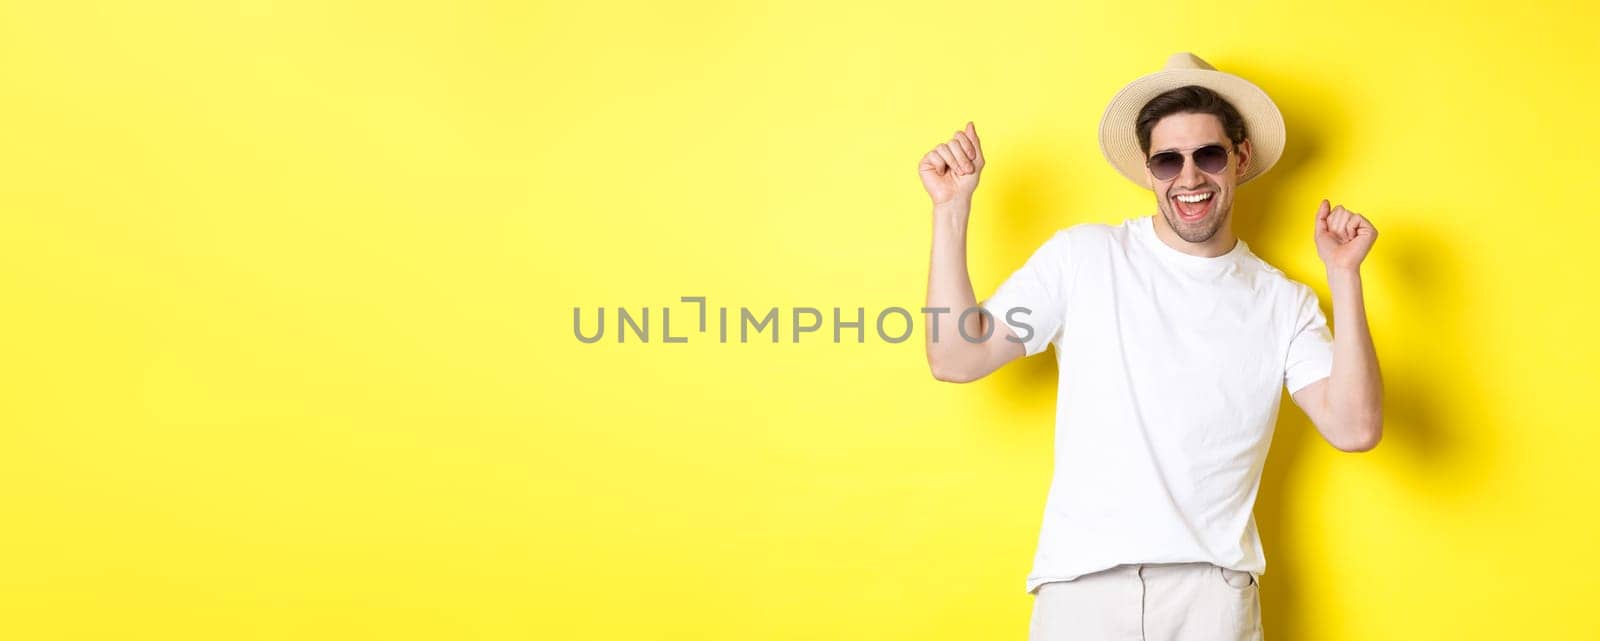 Tourism, travelling and holidays concept. Happy caucasian guy dancing and having fun on vacation, wearing sunglasses with straw hat, standing against yellow background.